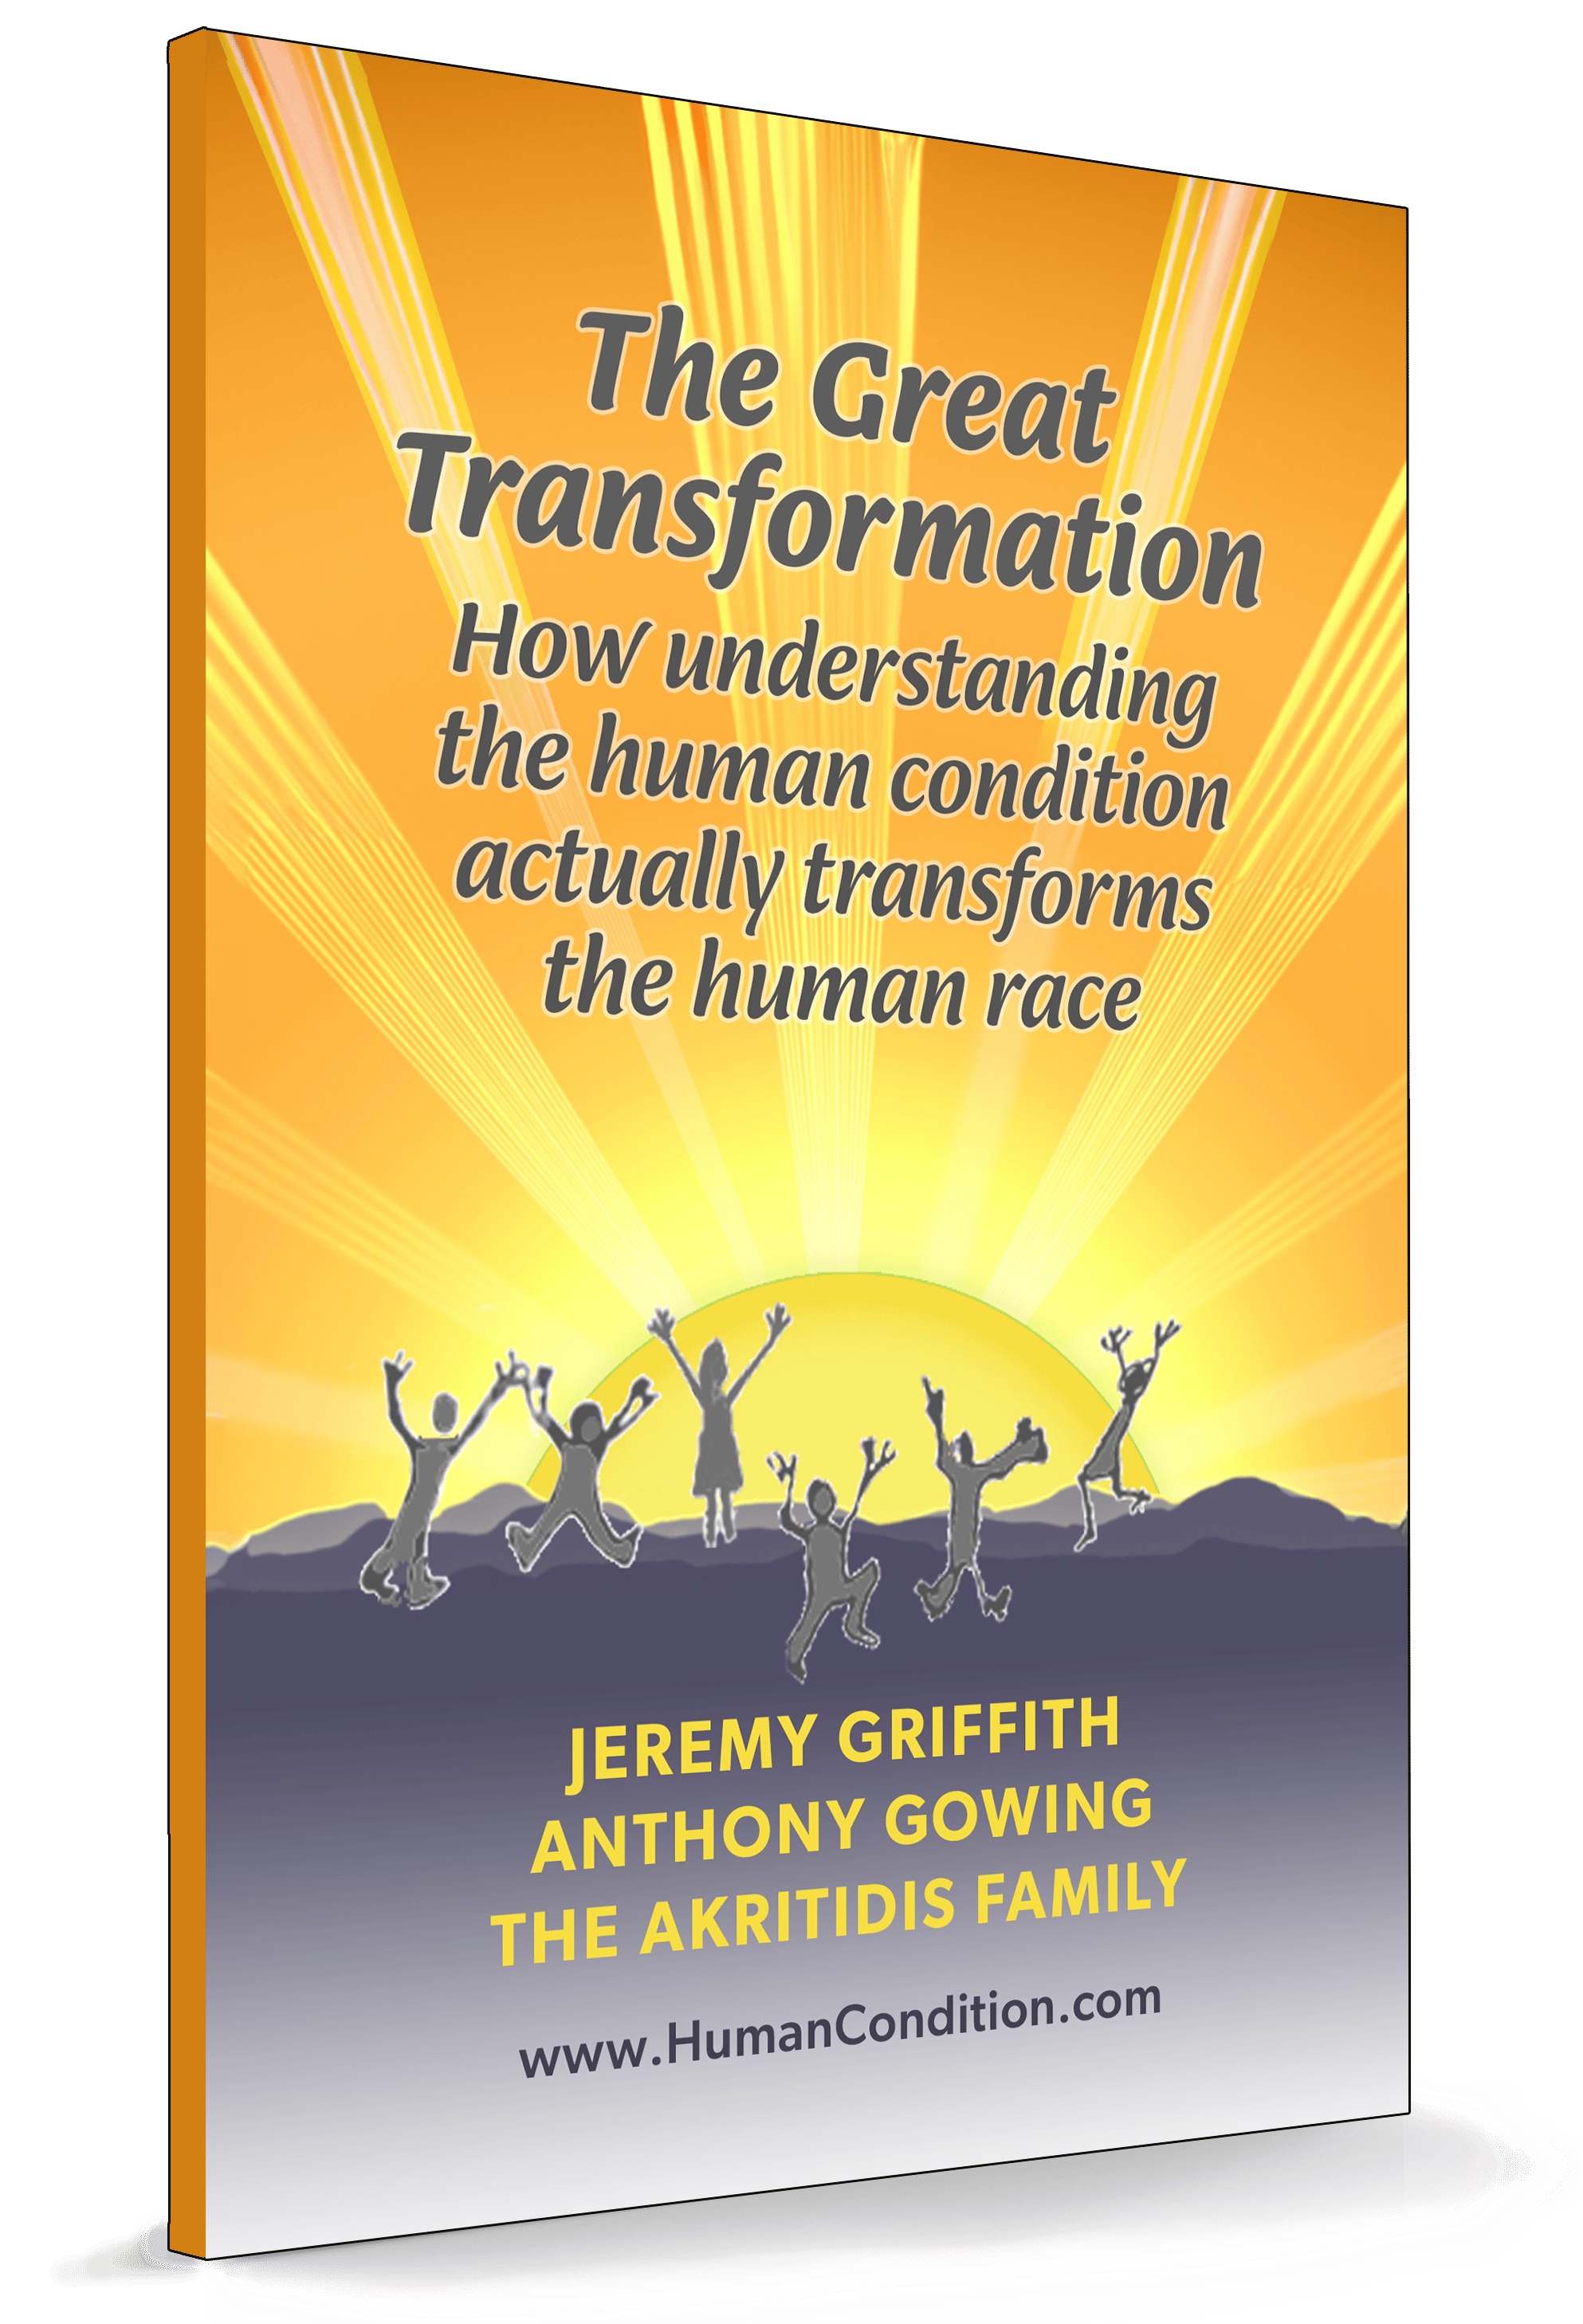 Book cover of 'The Great Transformation: How understanding the human condition actually transforms the human race' by Jeremy Griffith - World Transformation Movement